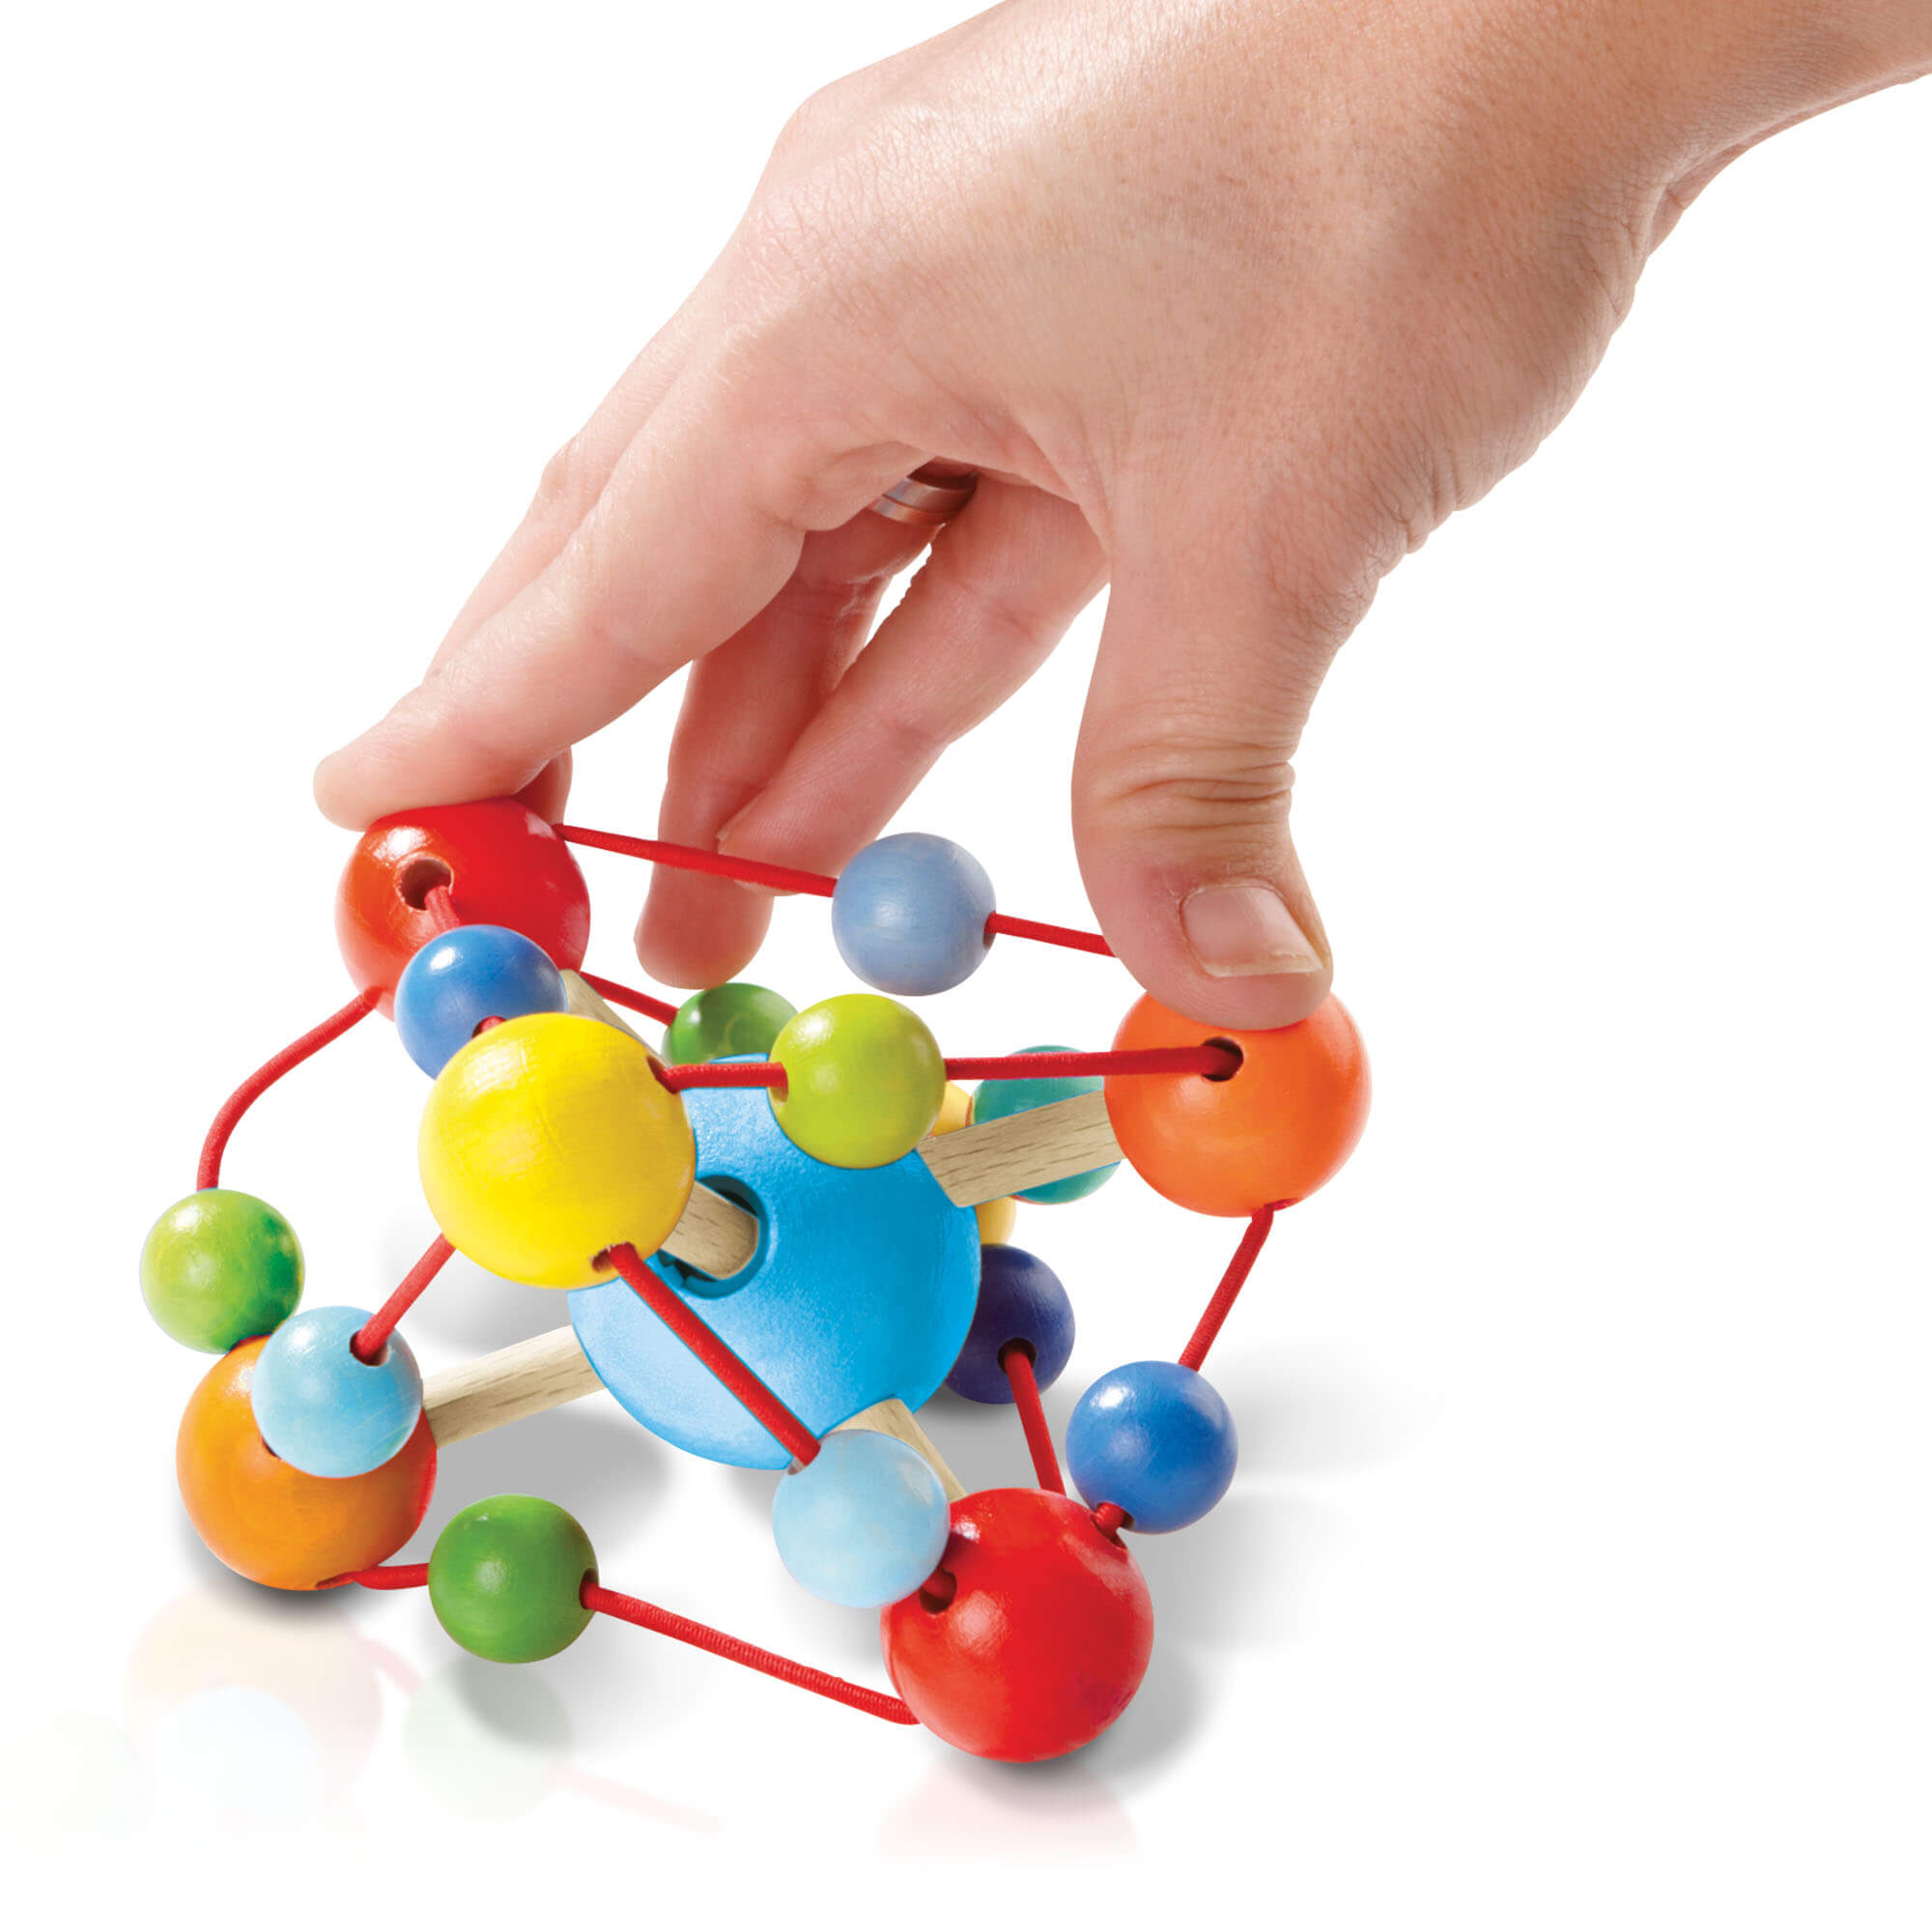 HABA Baby Grasping Toy Tirili (Made in Germany) - image 3 of 5